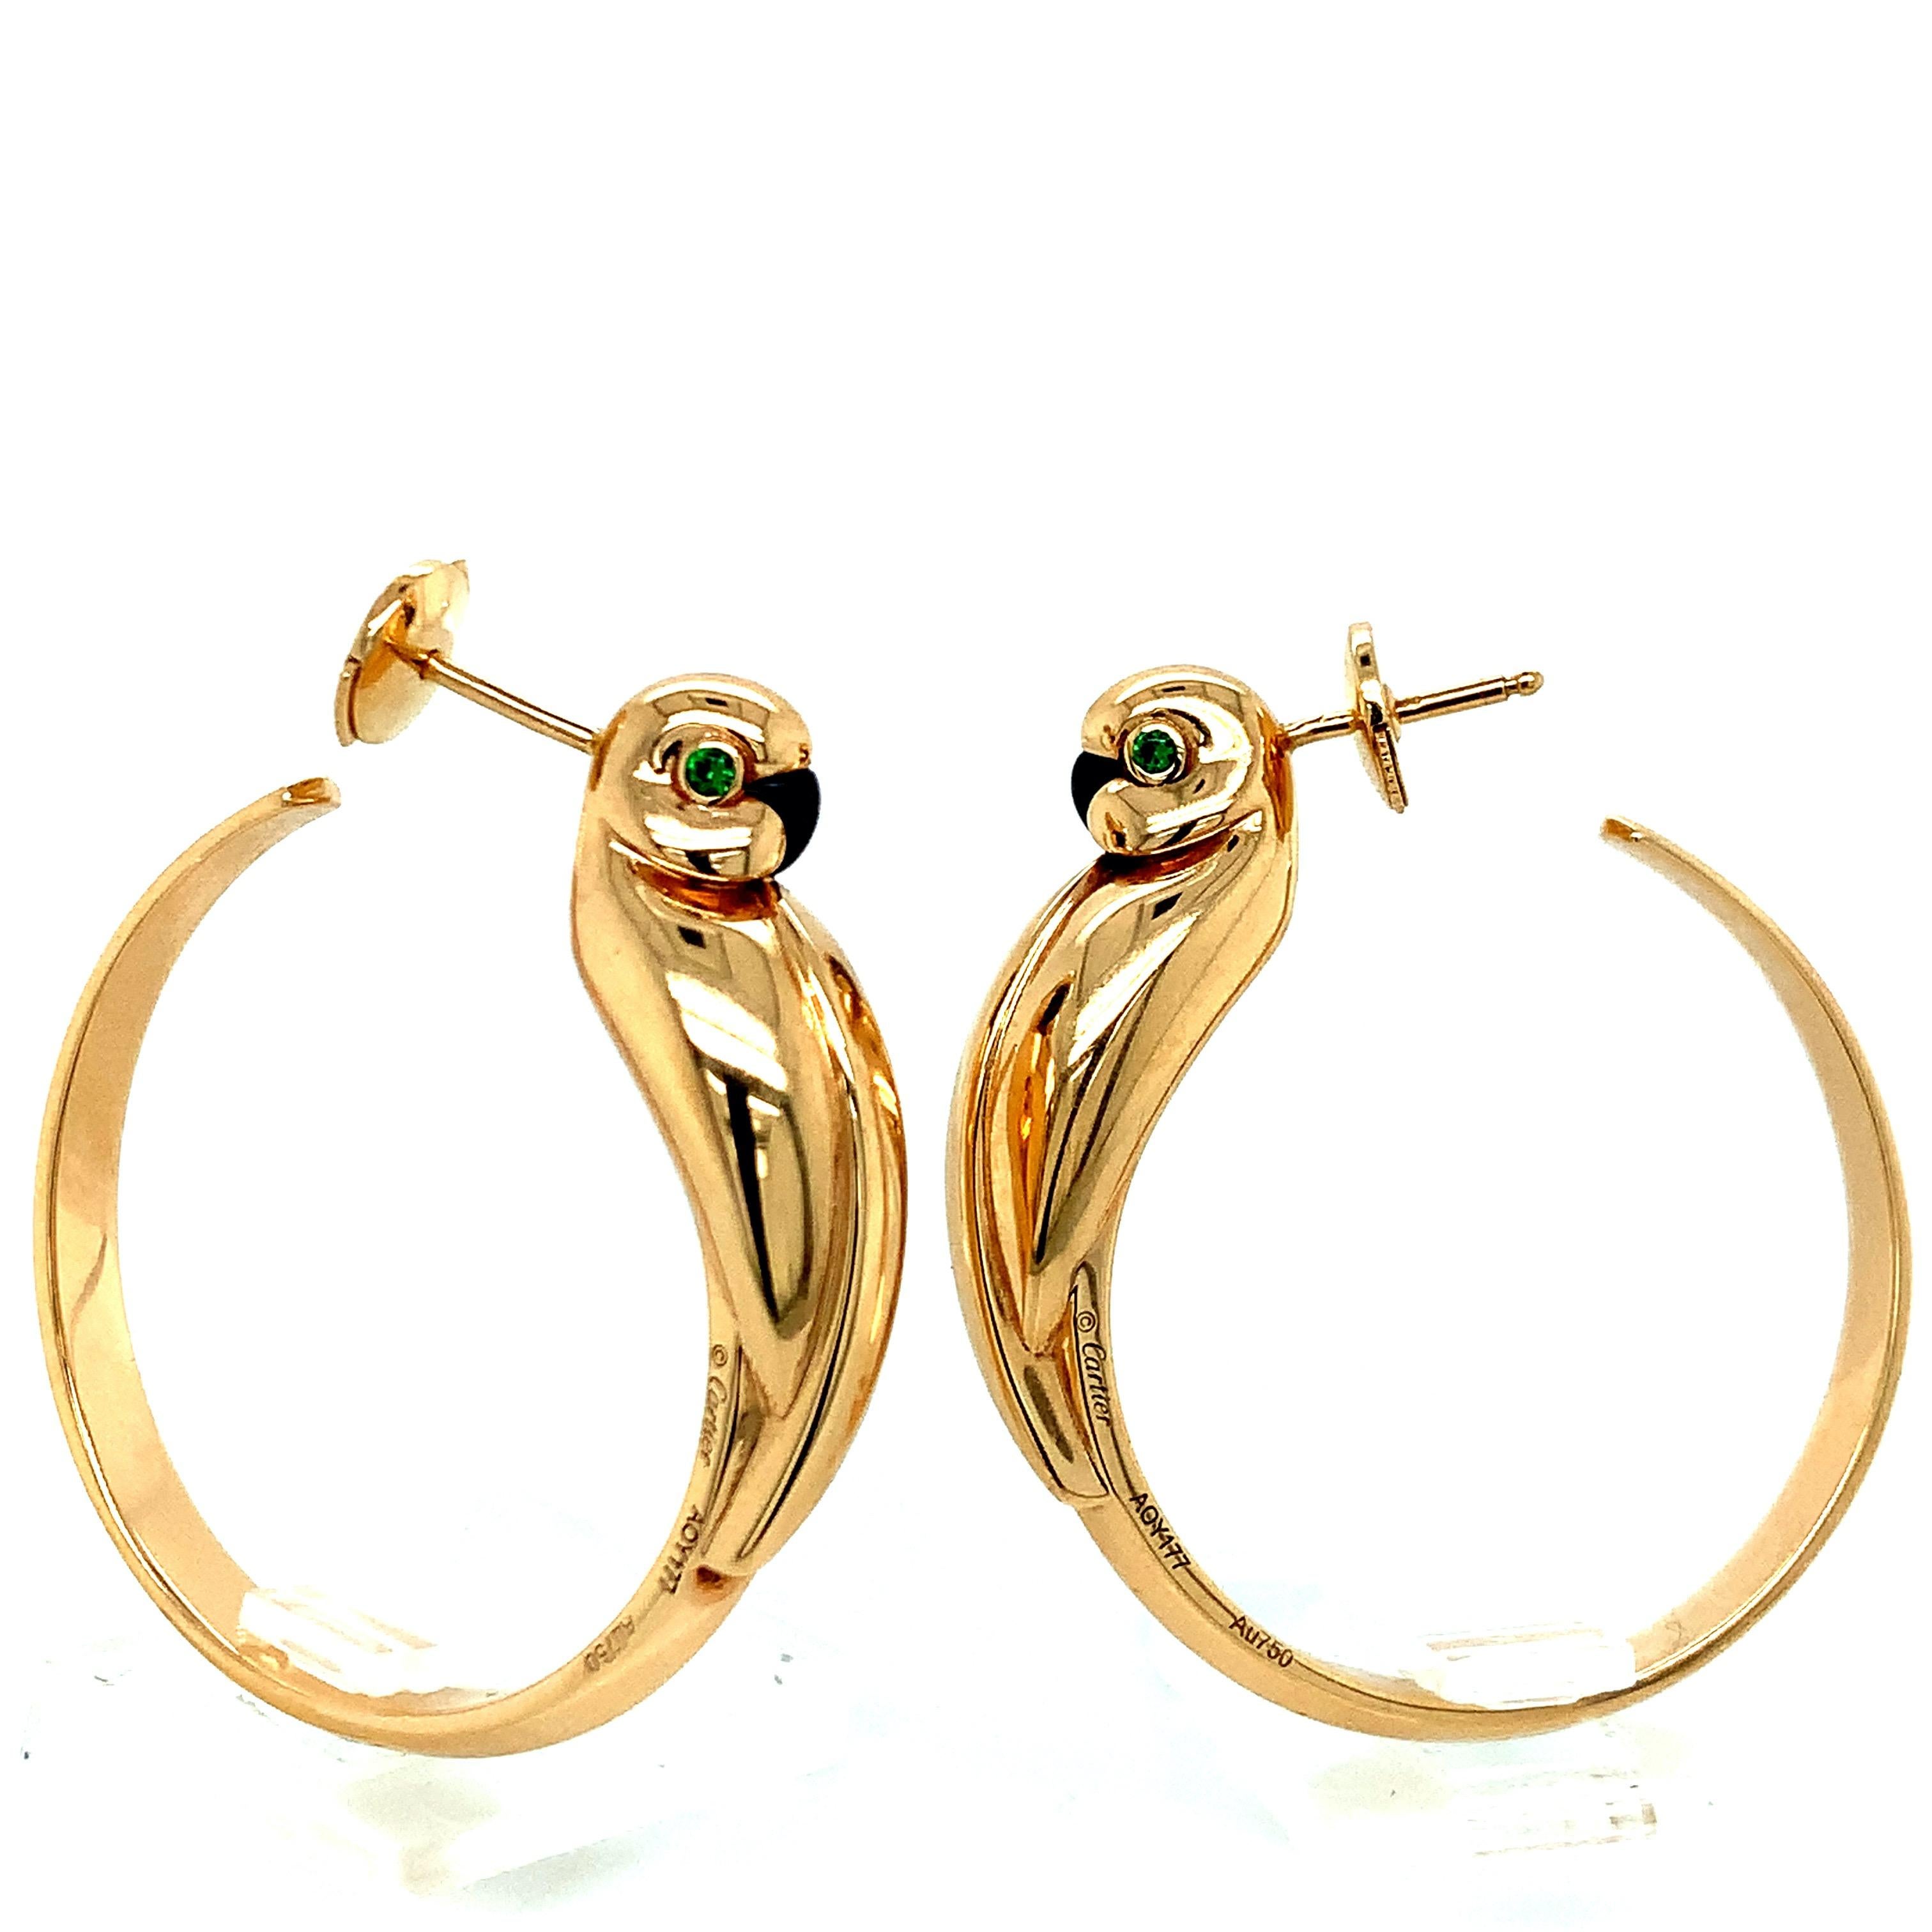 Cartier 18K Gold Parrot Hoop Earrings

Hoops made of 18 karat yellow gold, with parrot birds motif and emerald stones for the eyes; marked Cartier / Au750 / PA 750 Mecan / 18K. Serial No. AOY177.

Size: width 1.25 inches, length 1.38 inches
Total